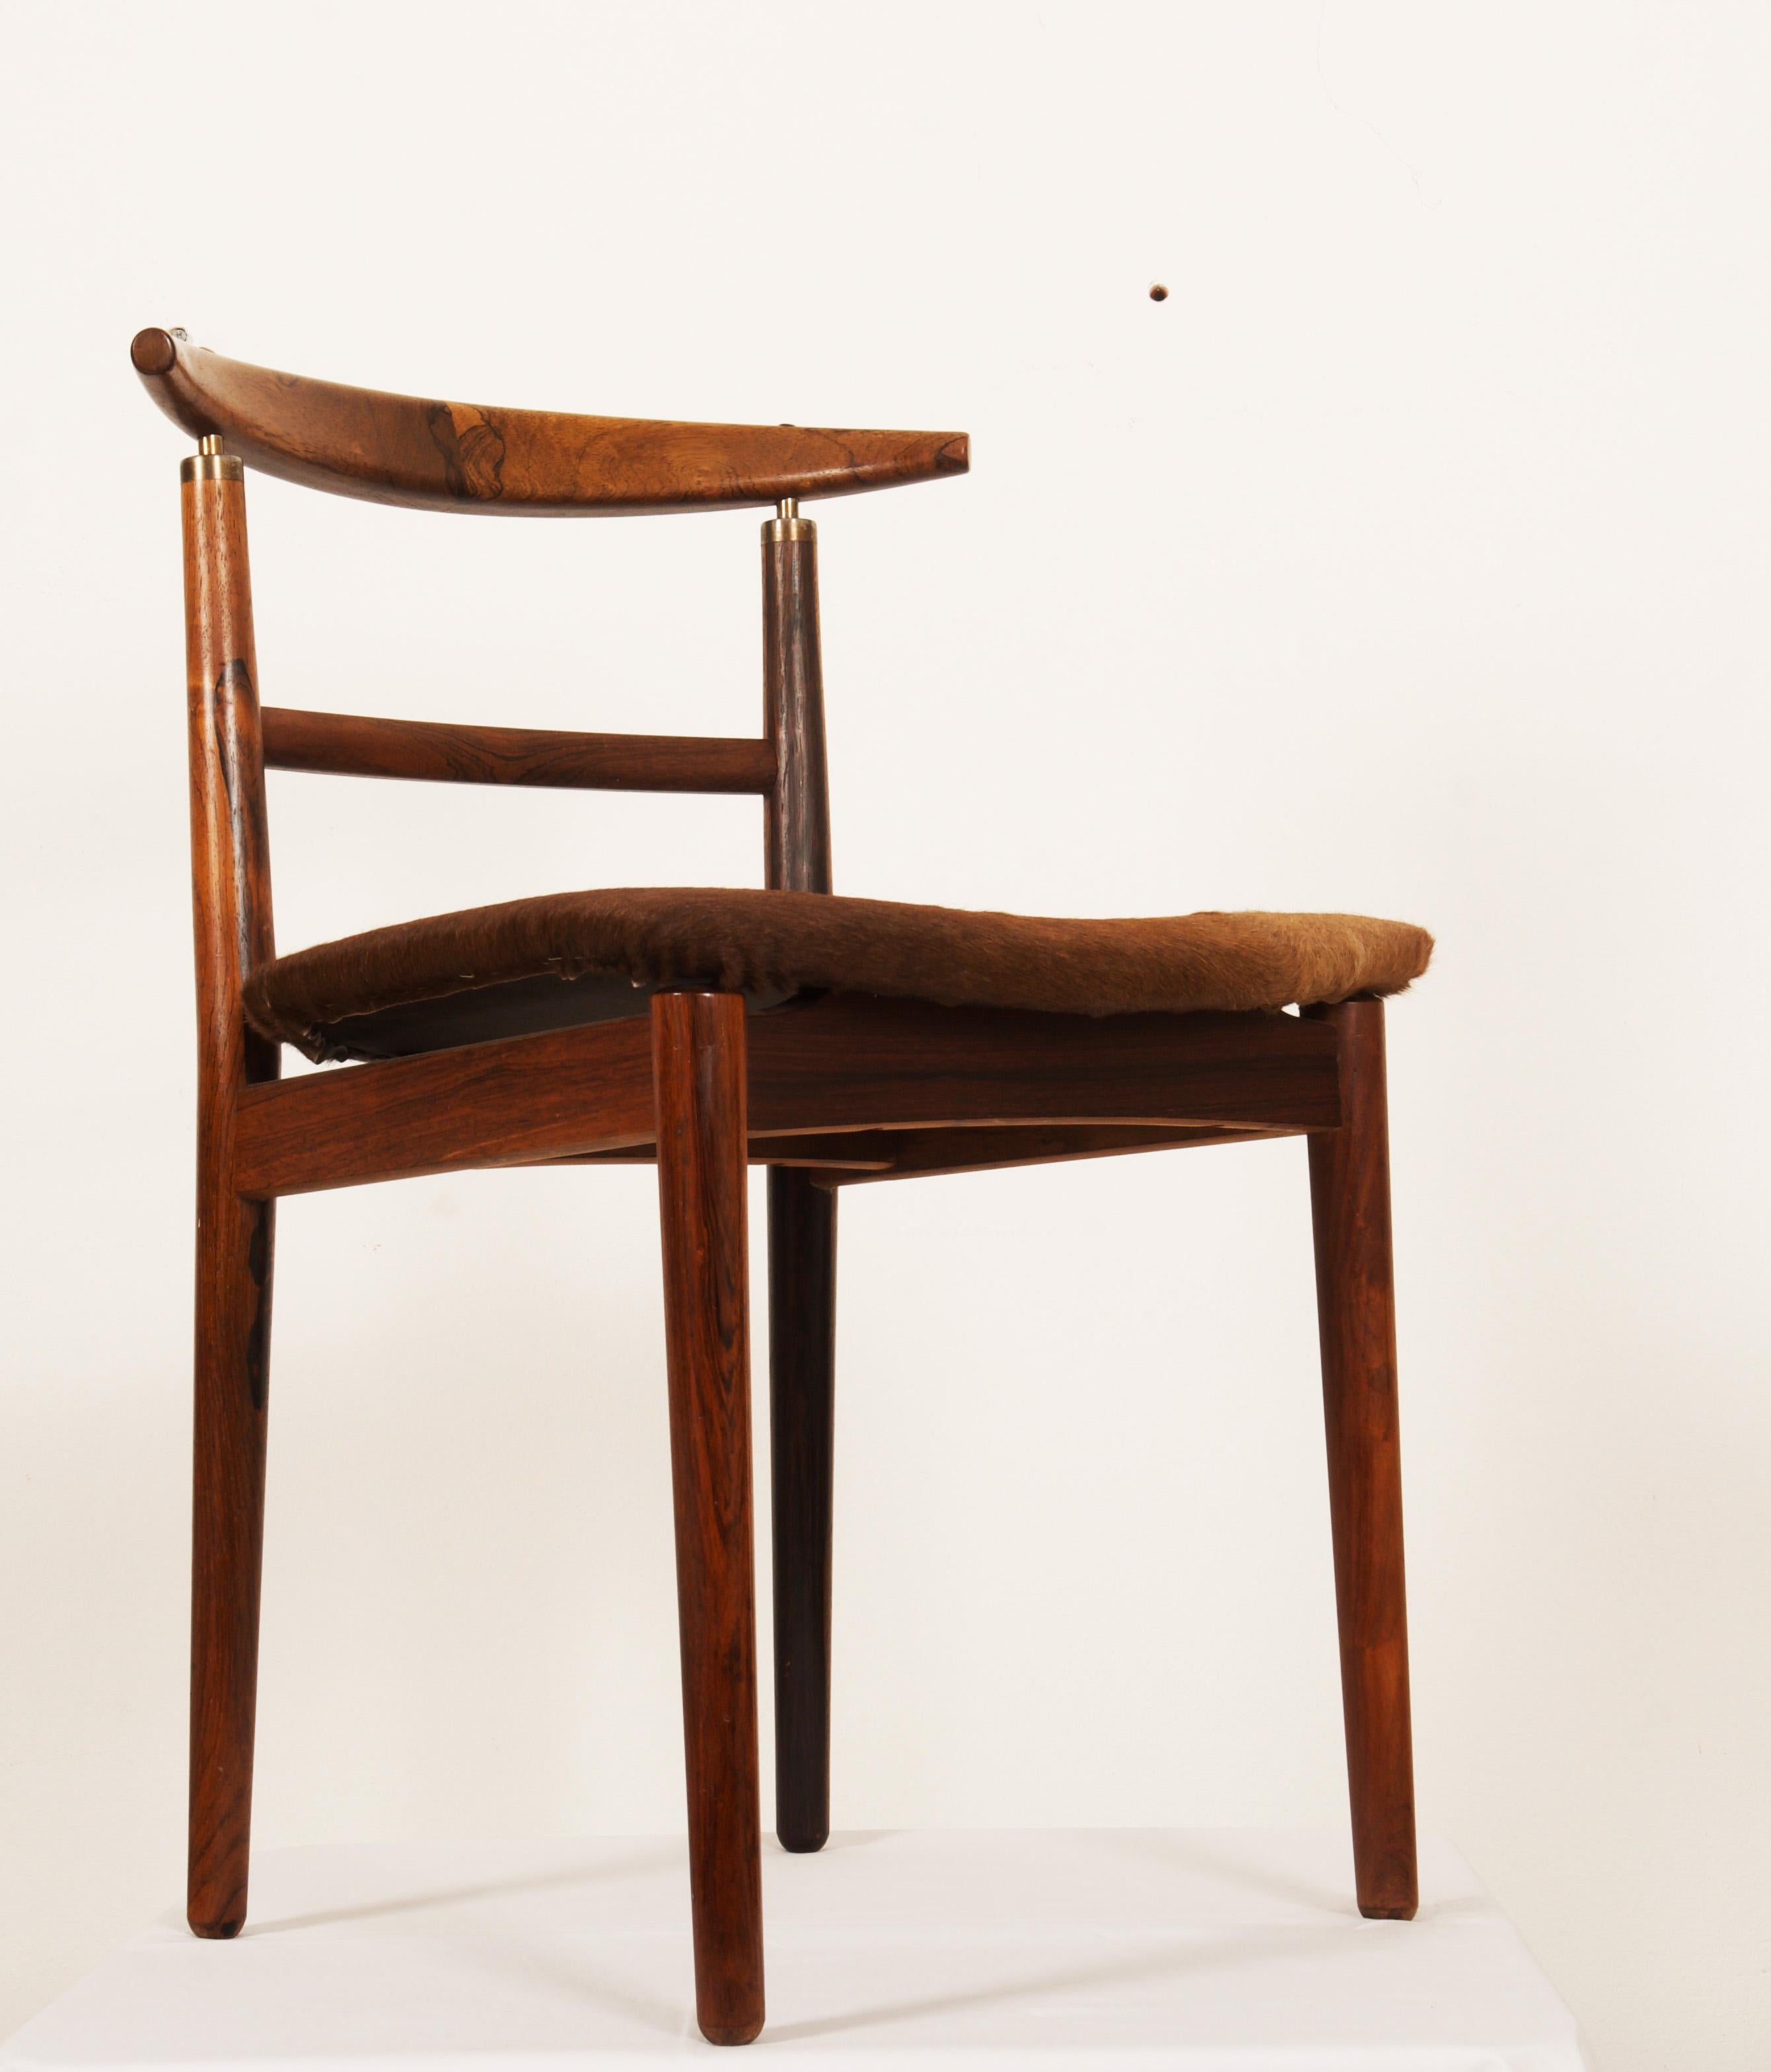 Mid-20th Century Danish Dining Room Chair by Helge Sibast and Borge Rammeskov For Sale